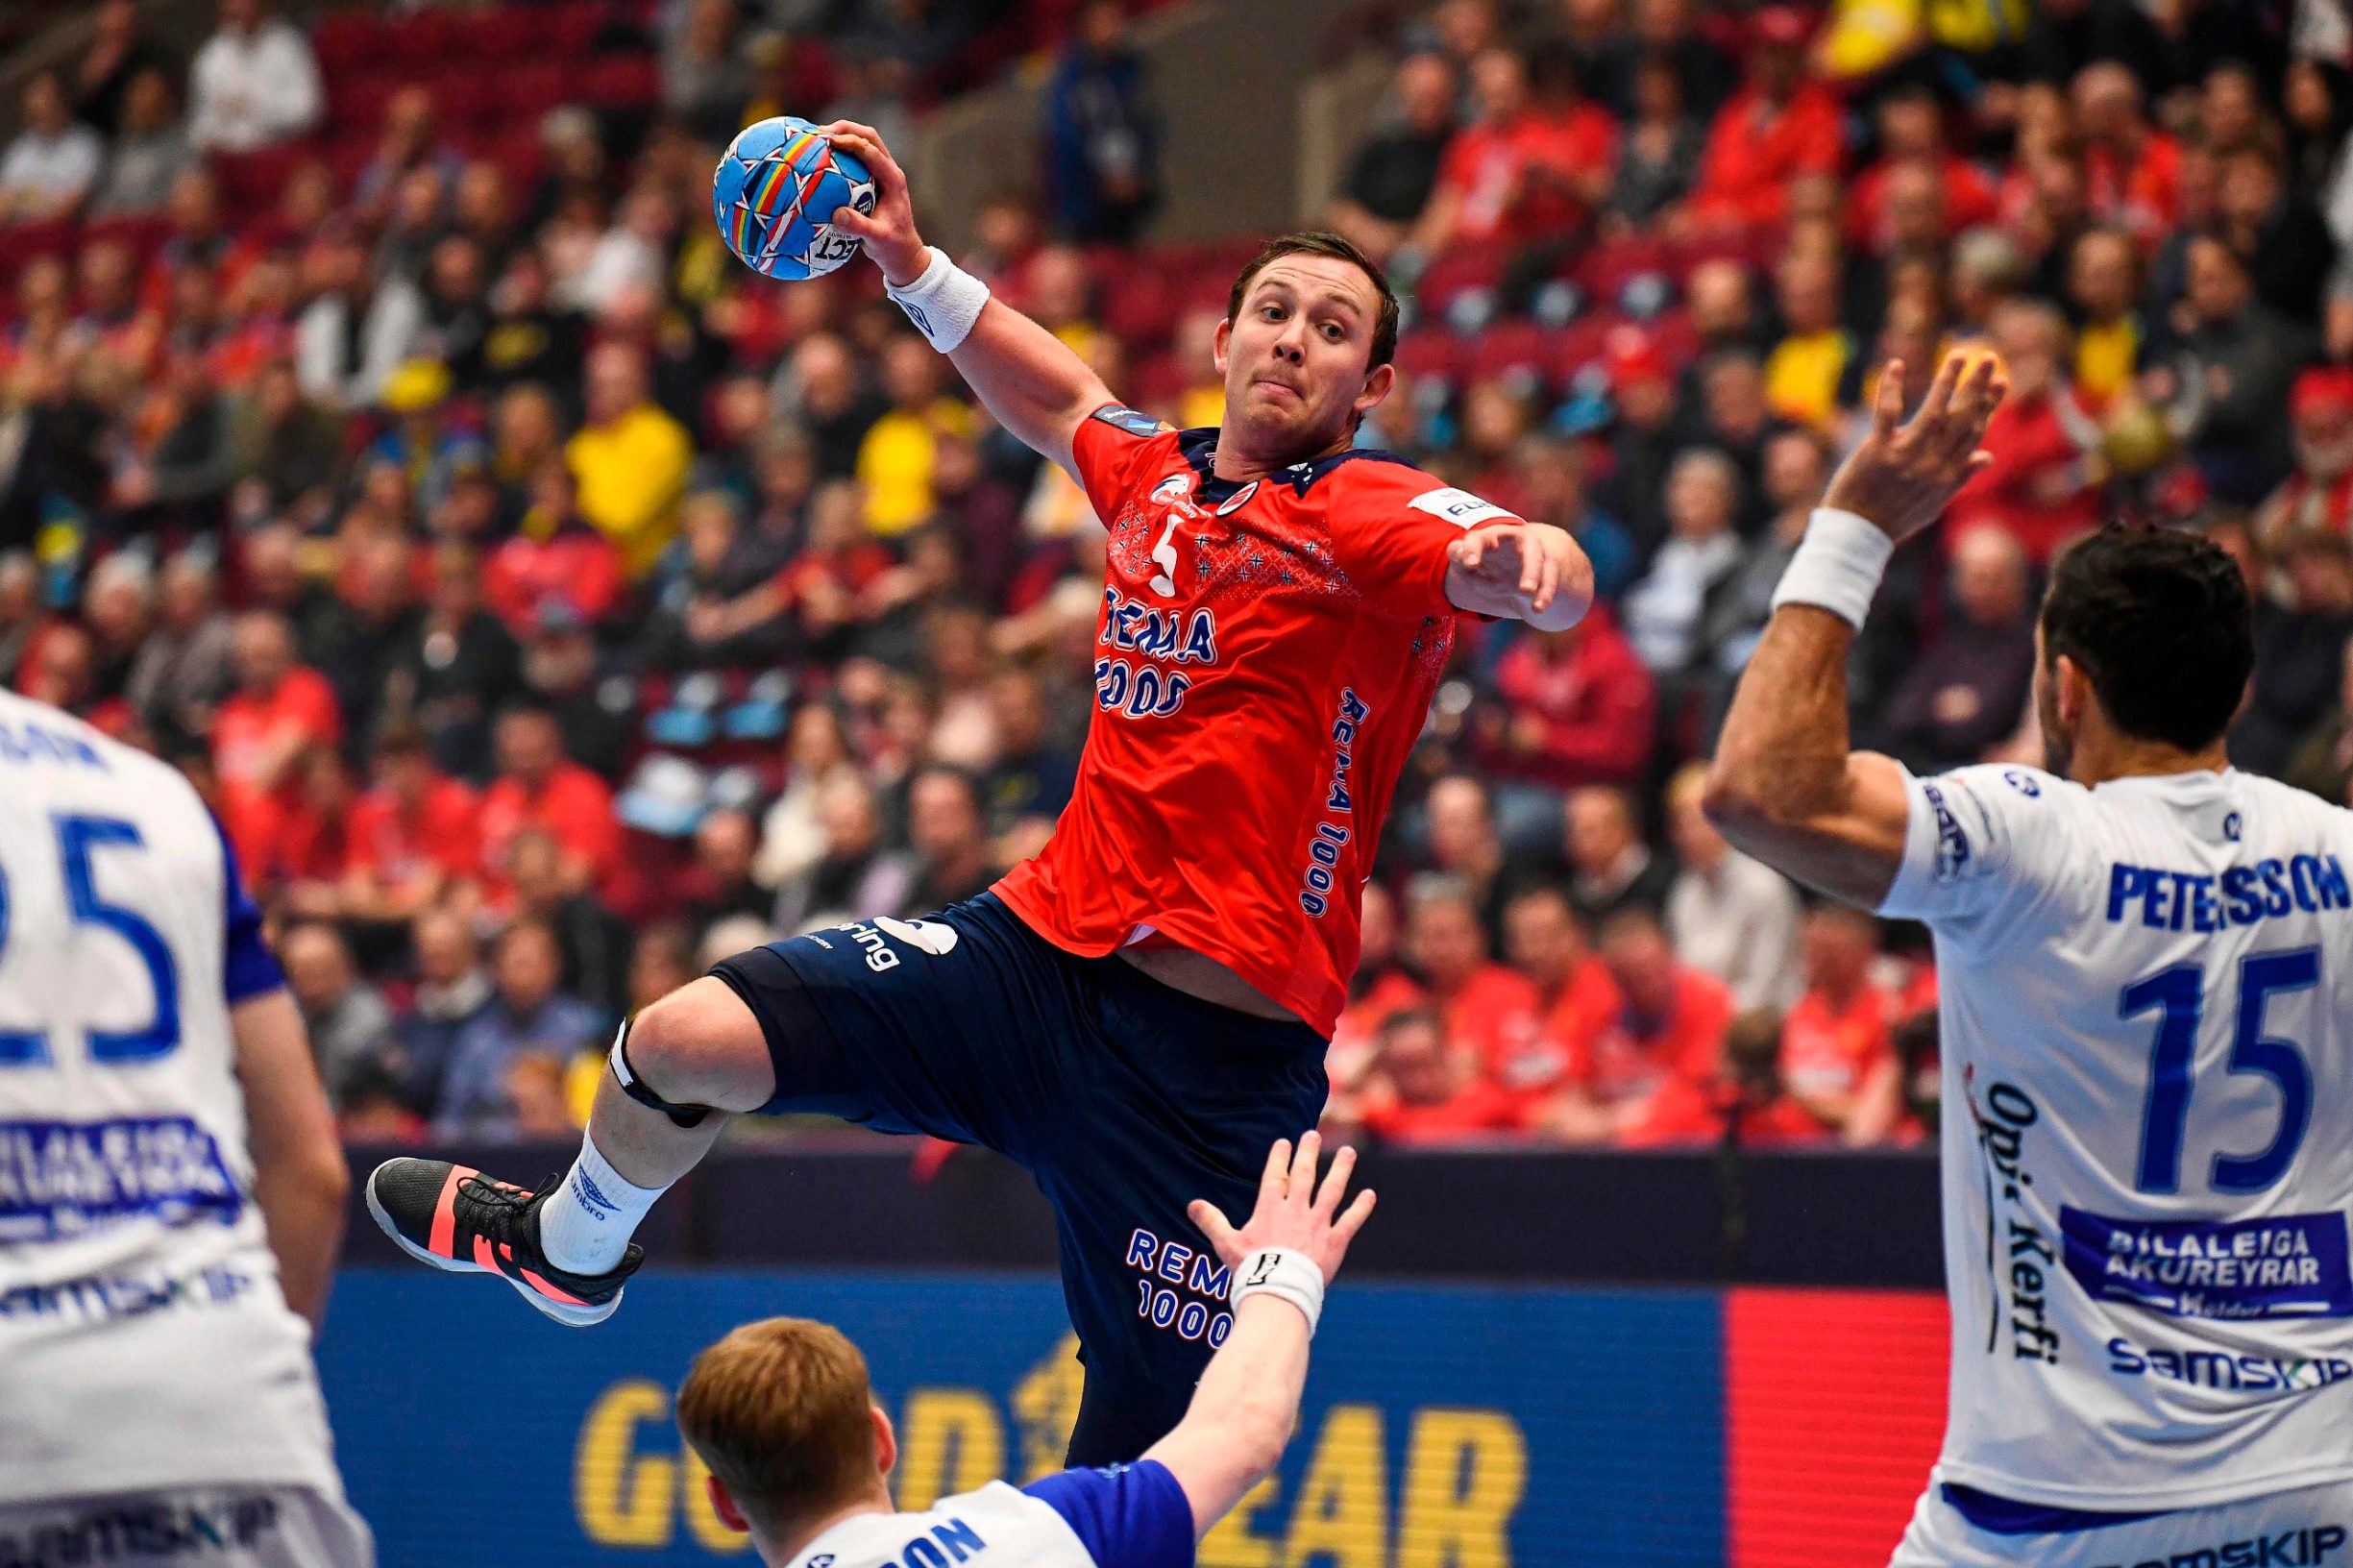 Norway's Sander Sagosen shoots during the Men's European Handball Championship main round day 4 Group II match Norway v Iceland in Malmo, Sweden on January 21, 2020. (Photo by Jonathan NACKSTRAND / AFP)